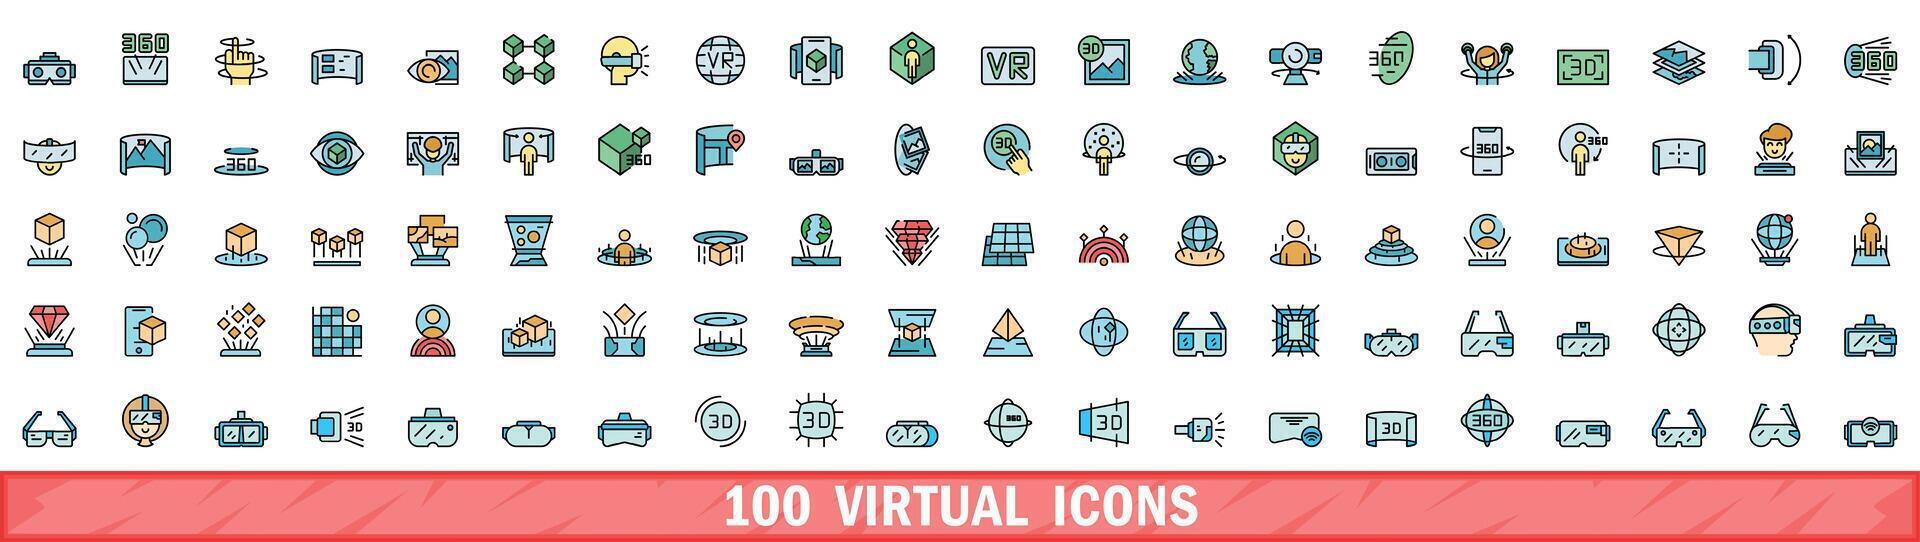 100 virtual icons set, color line style vector